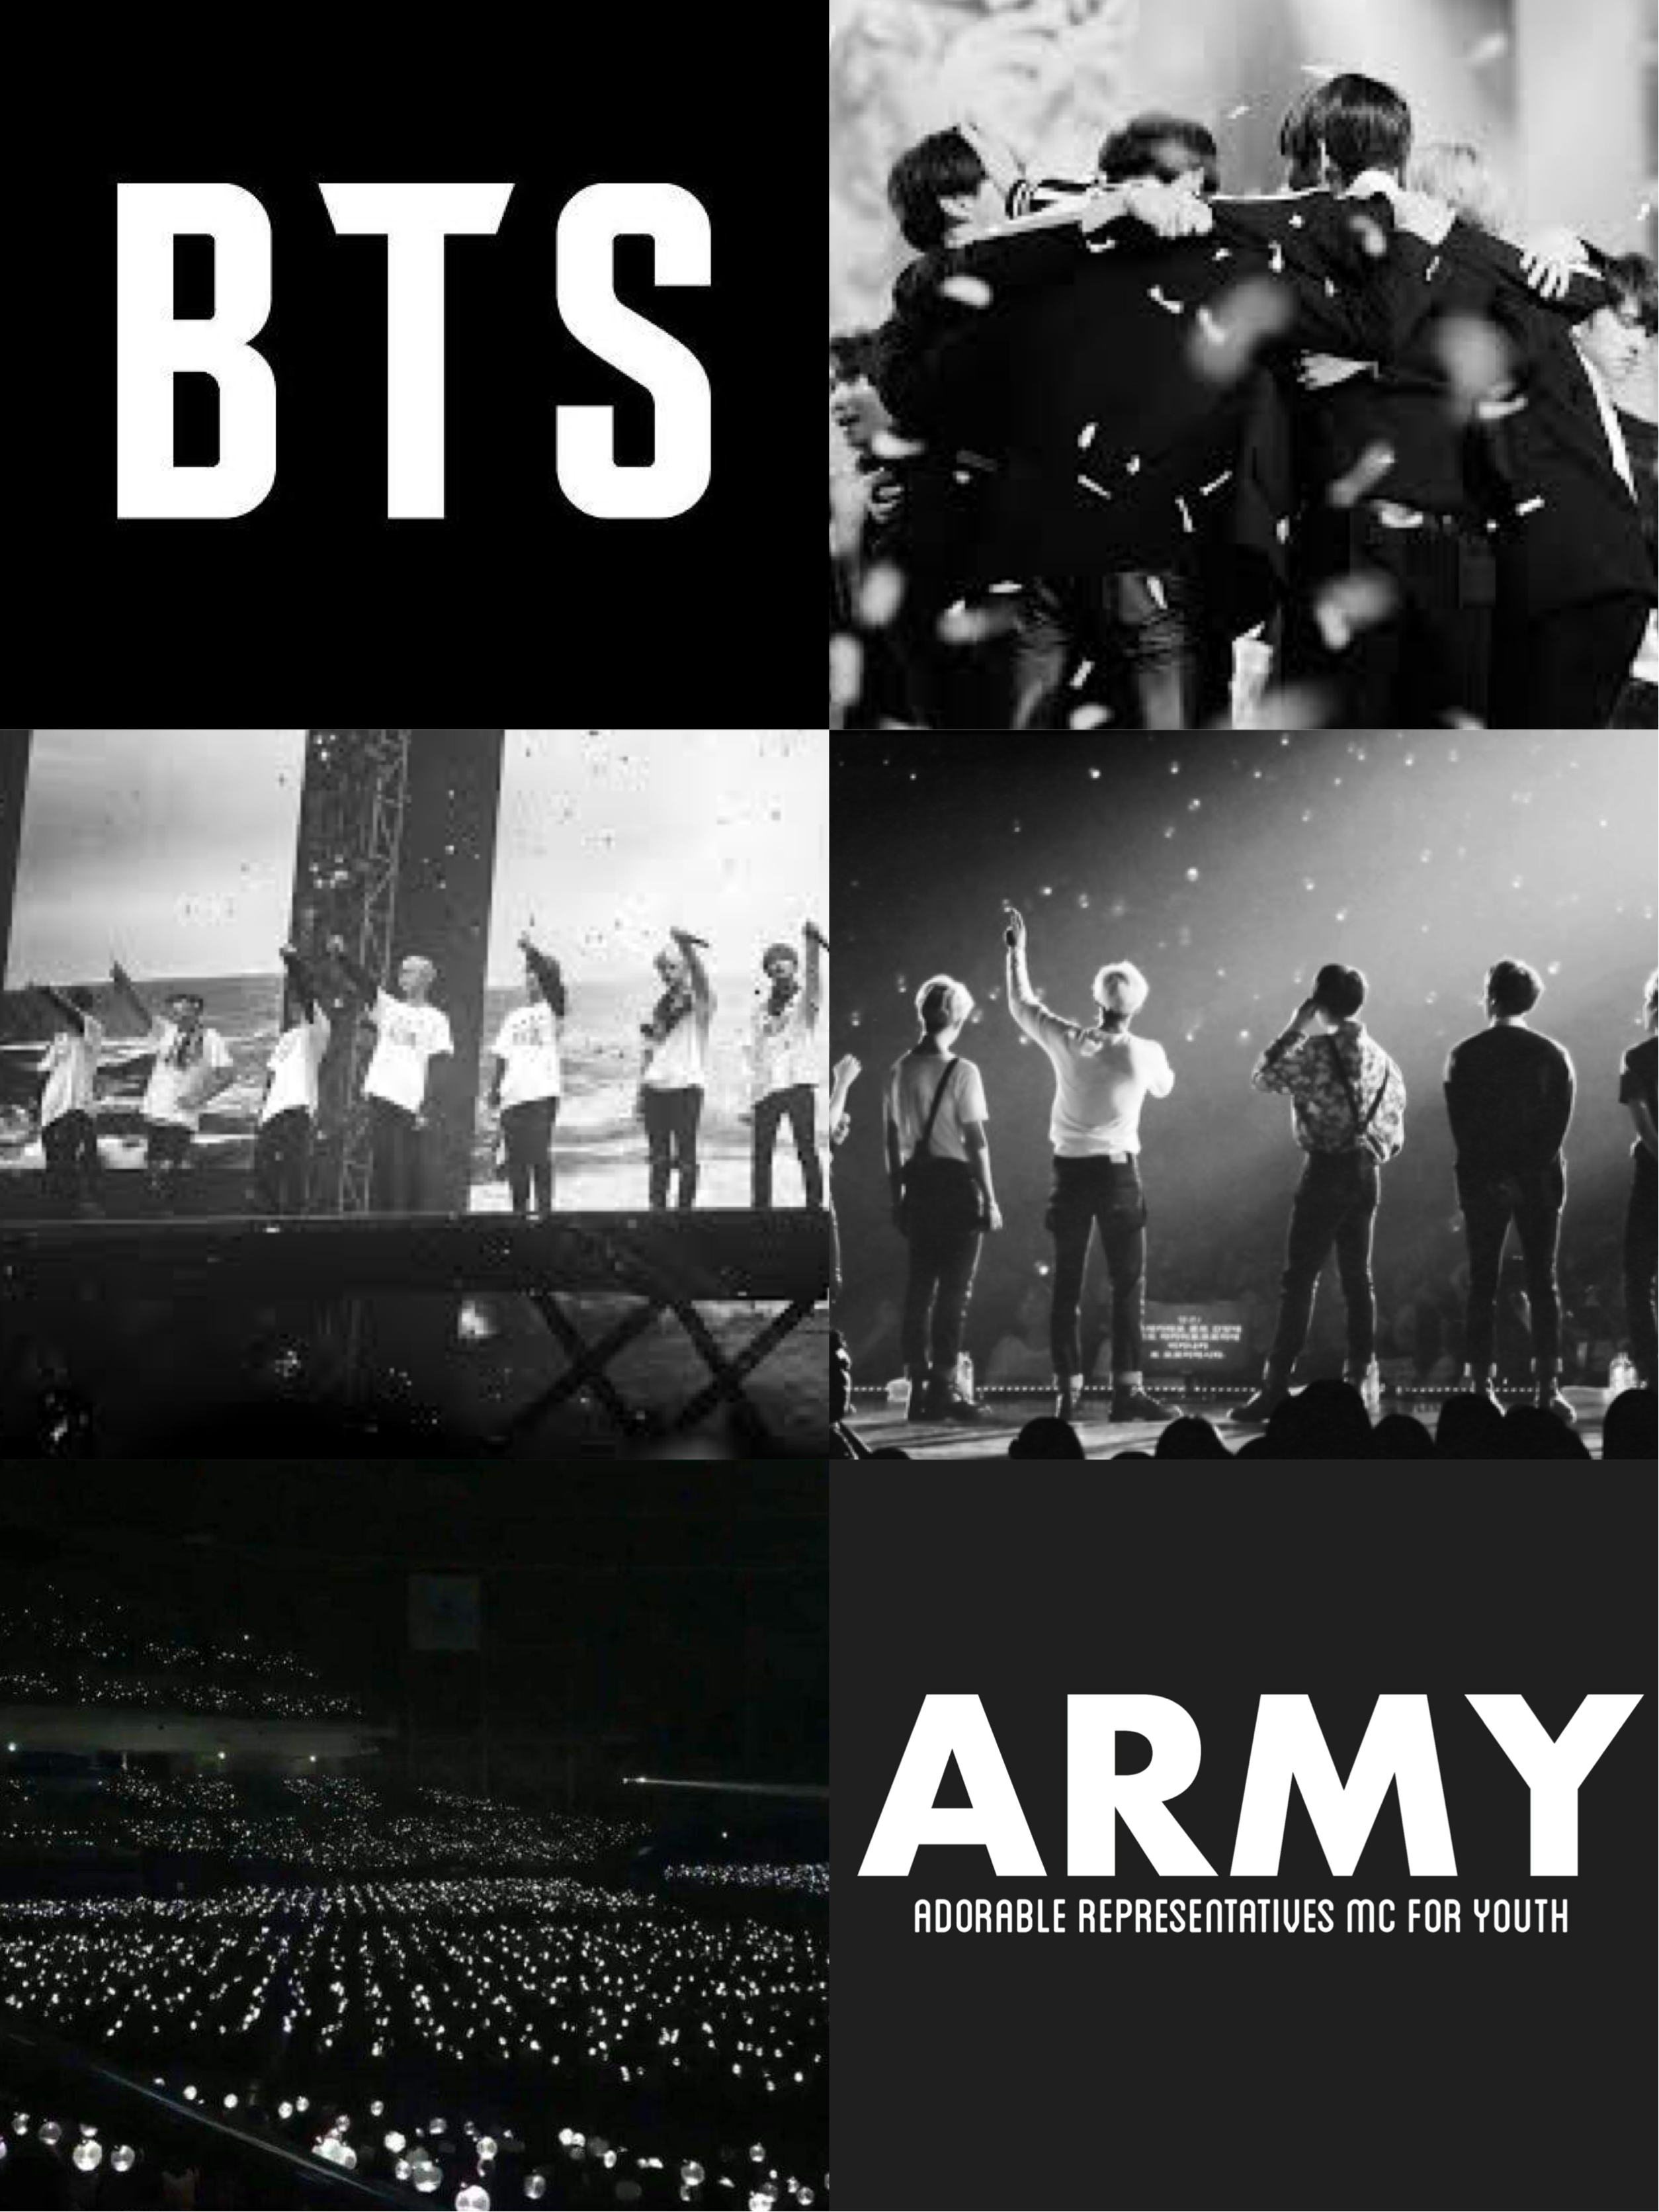 A BTS  and ARMY  Aesthetic  Image by Katiecake 12